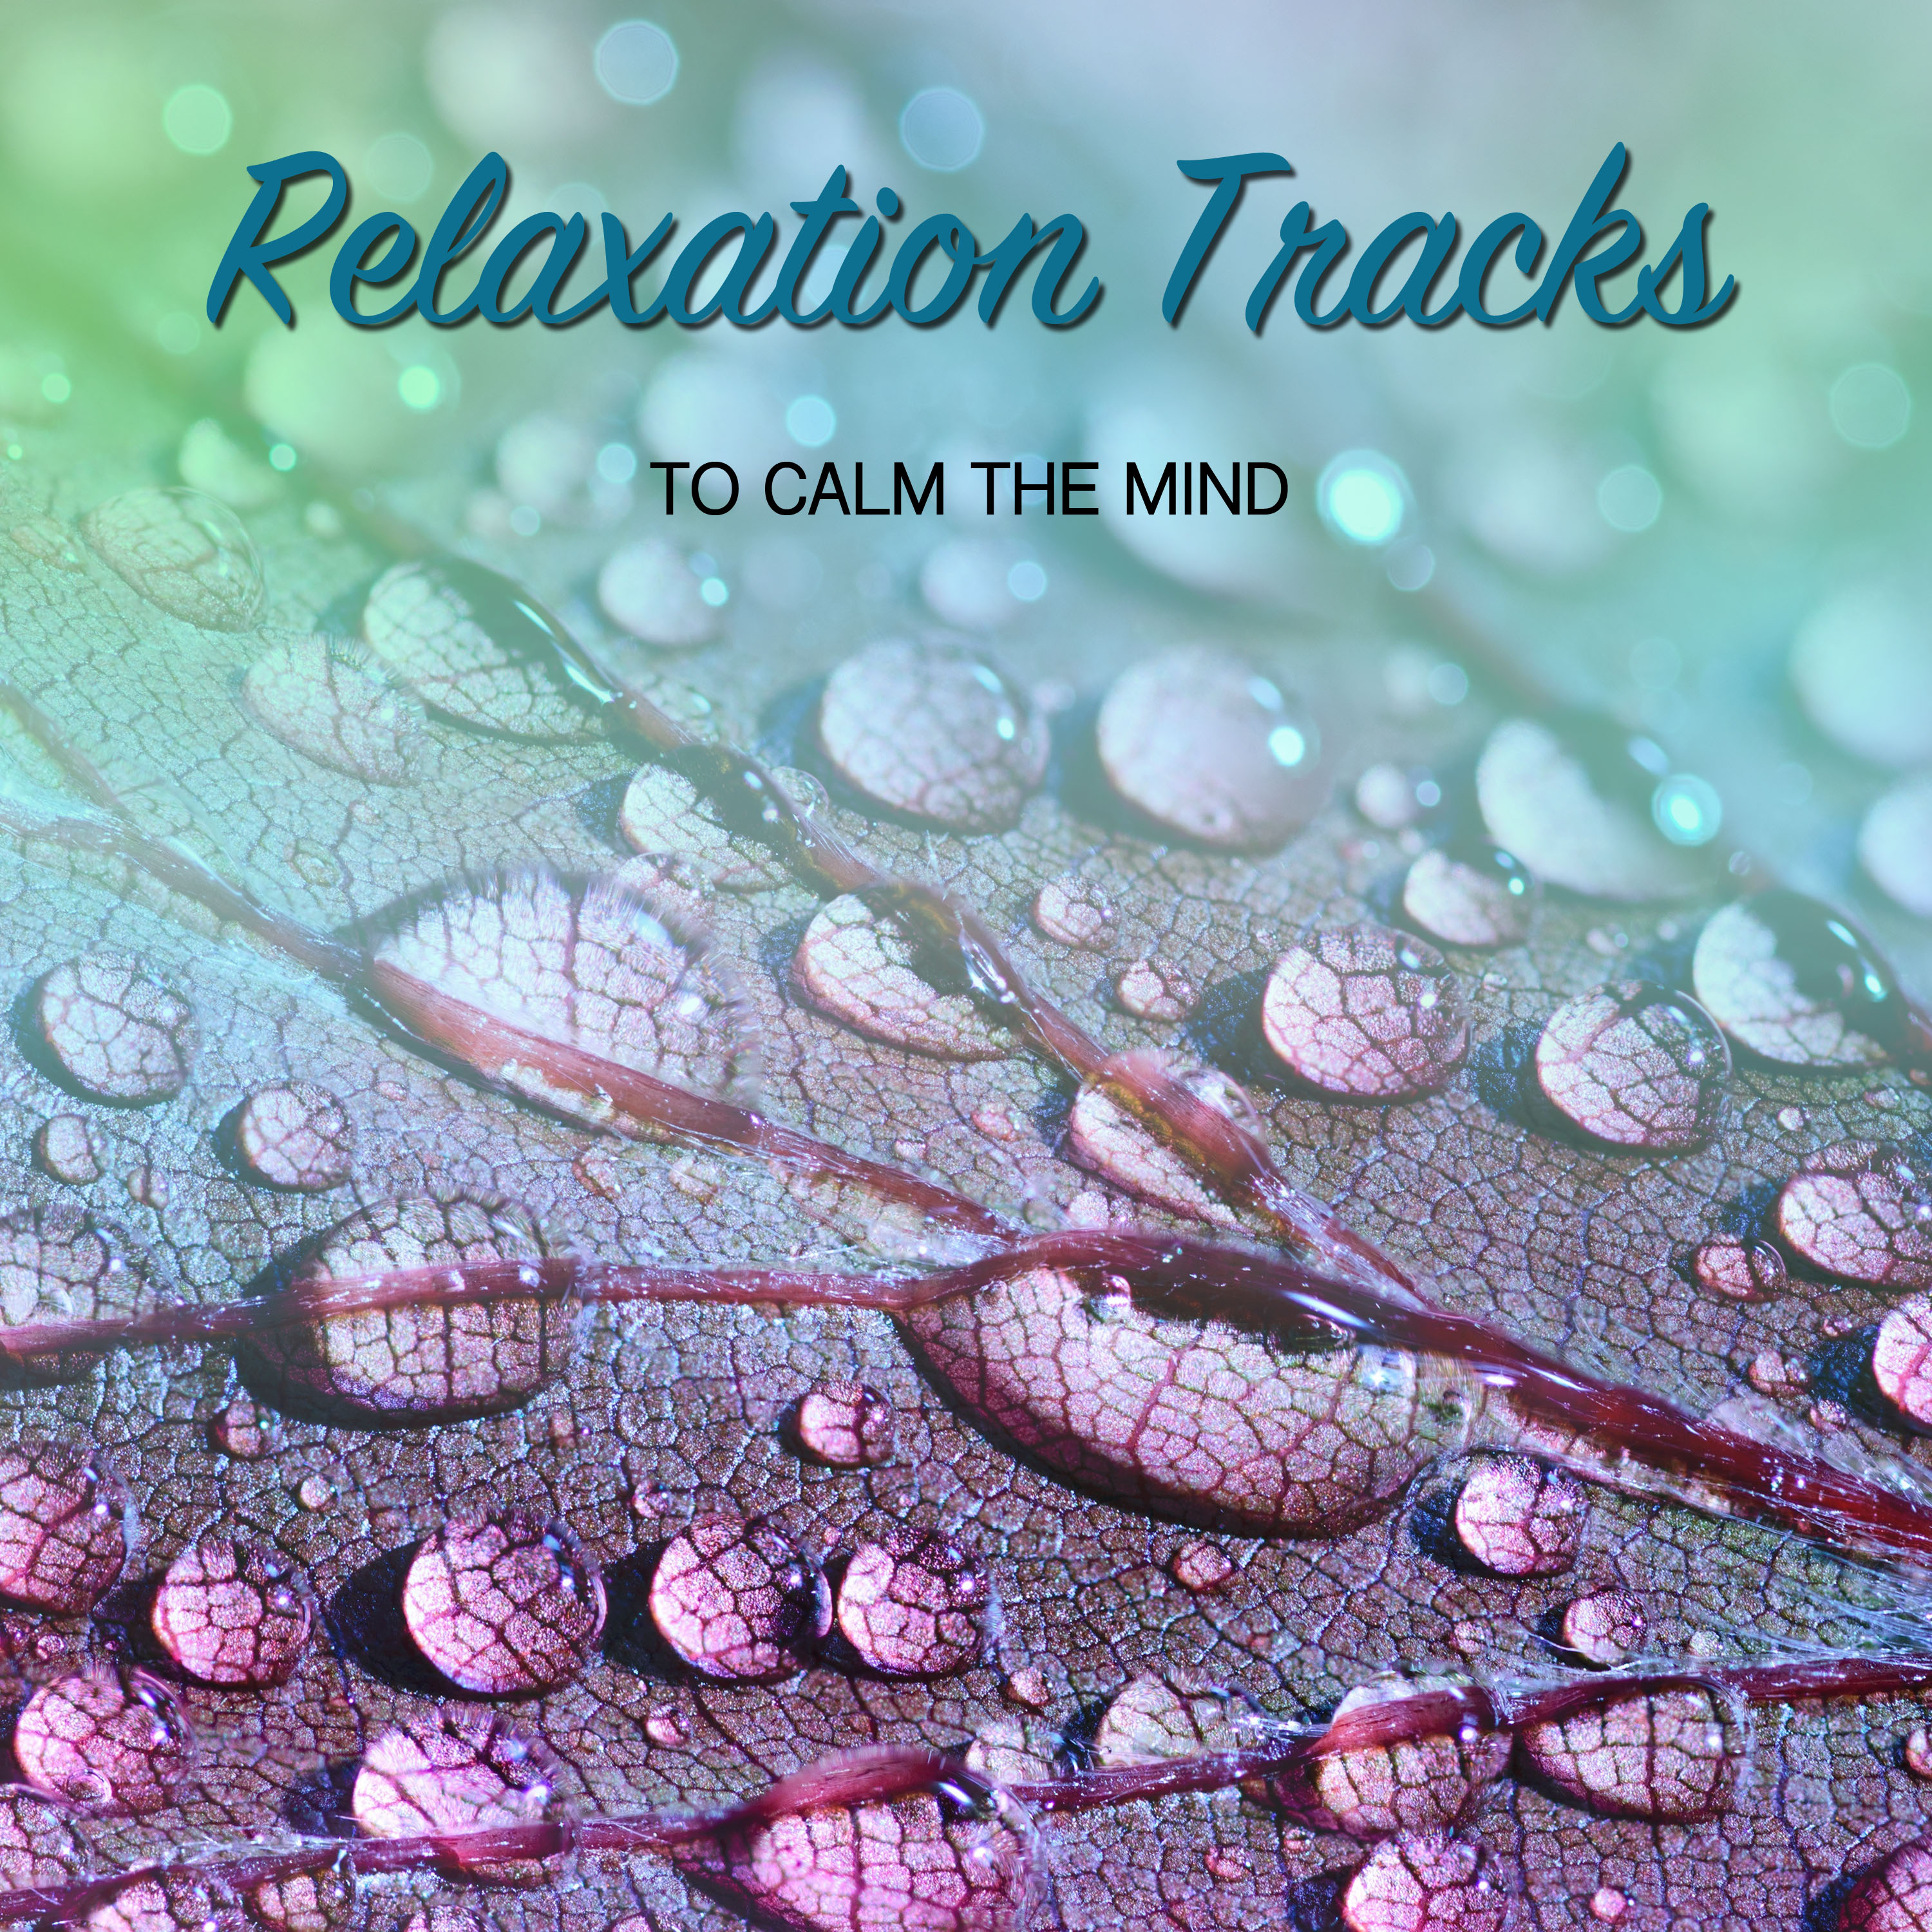 18 Relaxation Tracks to Calm the Mind